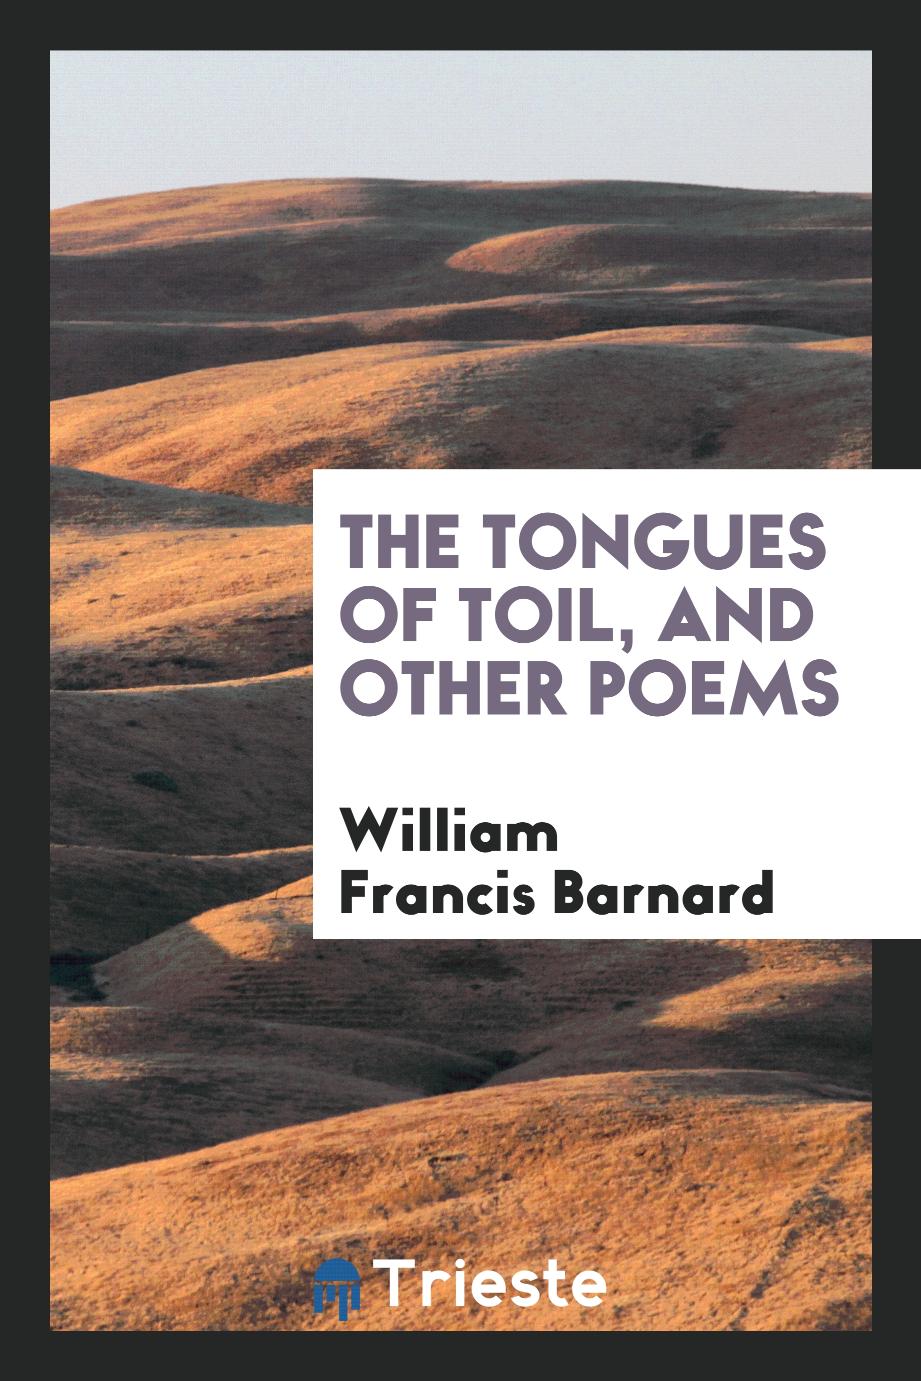 The Tongues of Toil, and Other Poems